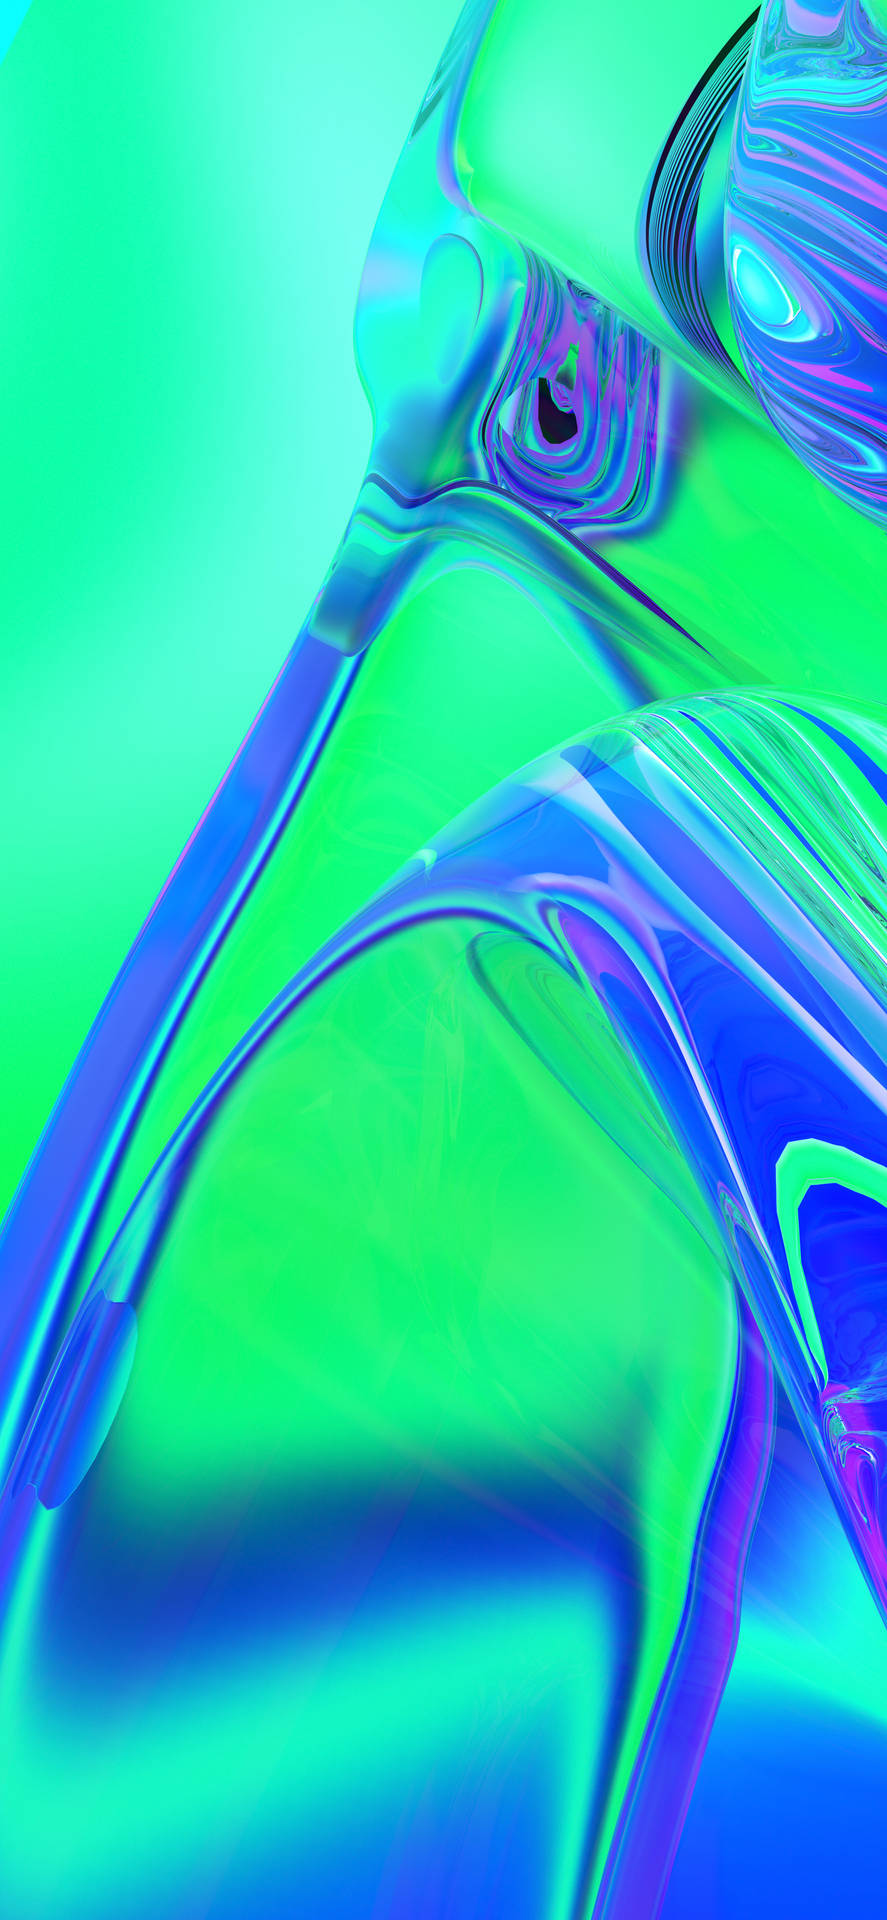 Close-up Green Liquid Surface Mobile 3d